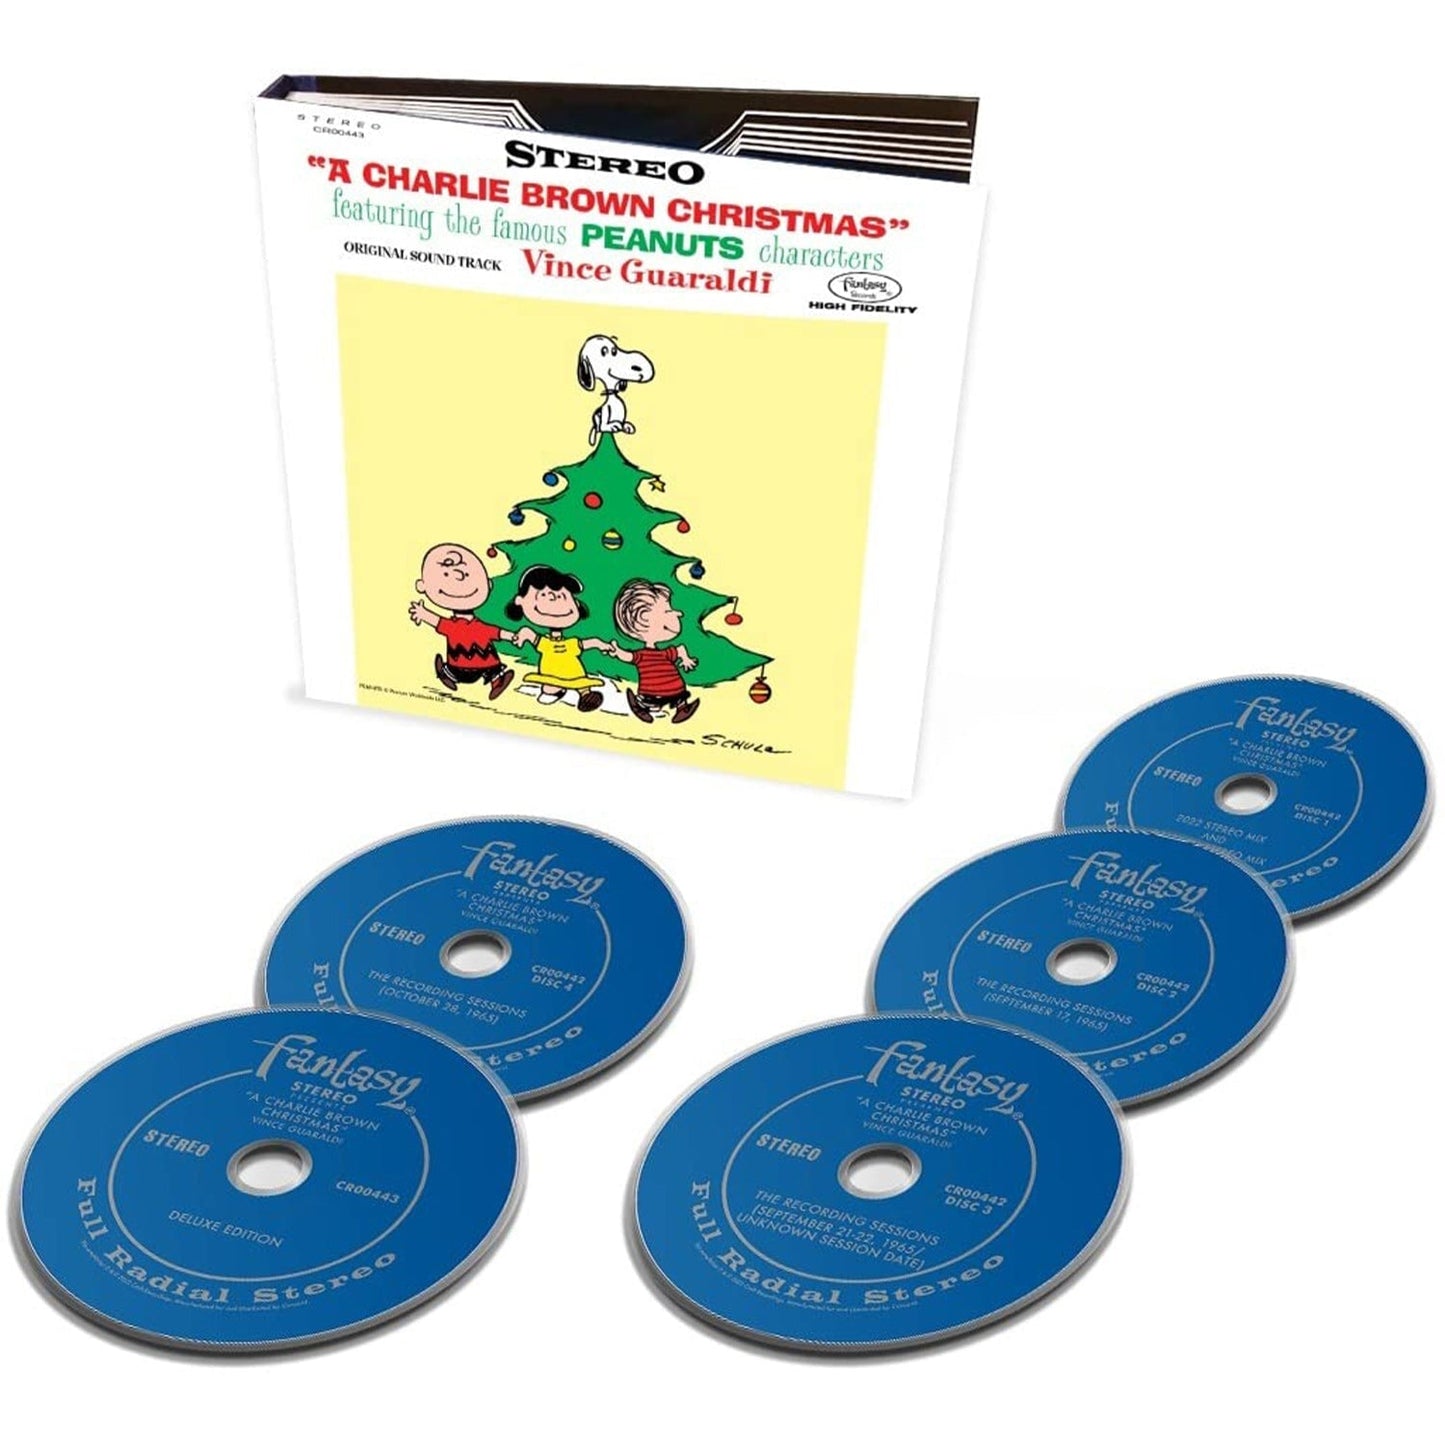 A Charlie Brown Christmas (Original Soundtrack) (Super Deluxe Edition) (4 CD + Blu-ray Audio)